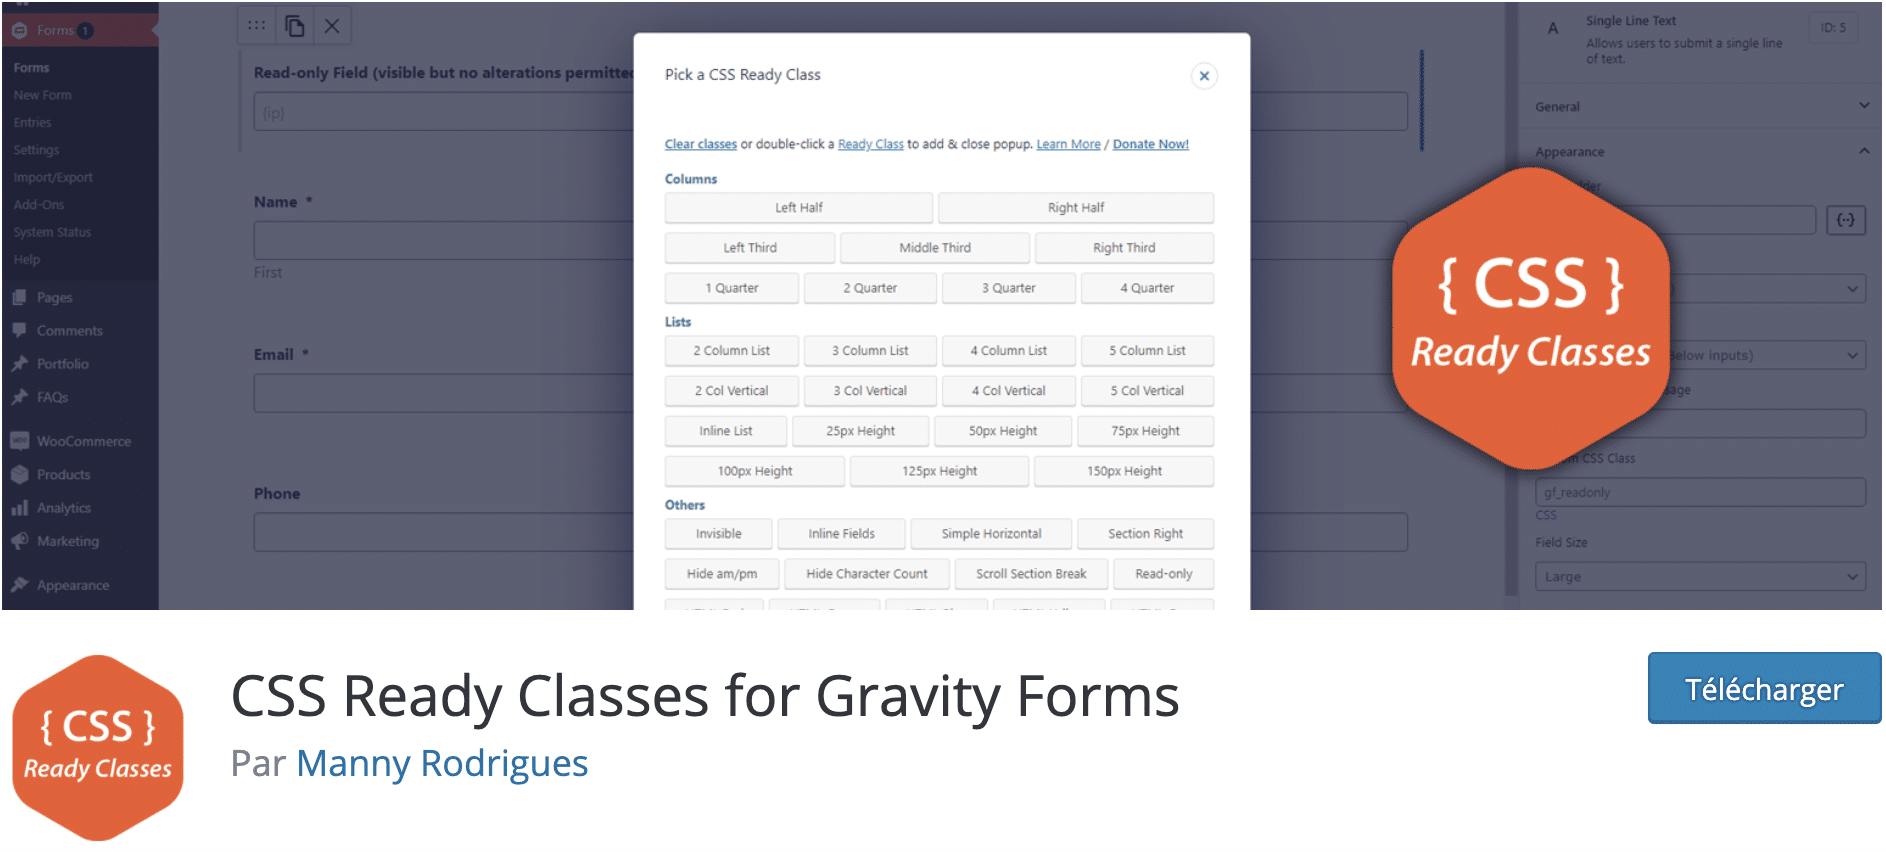 CSS Ready Classes for Gravity Forms.